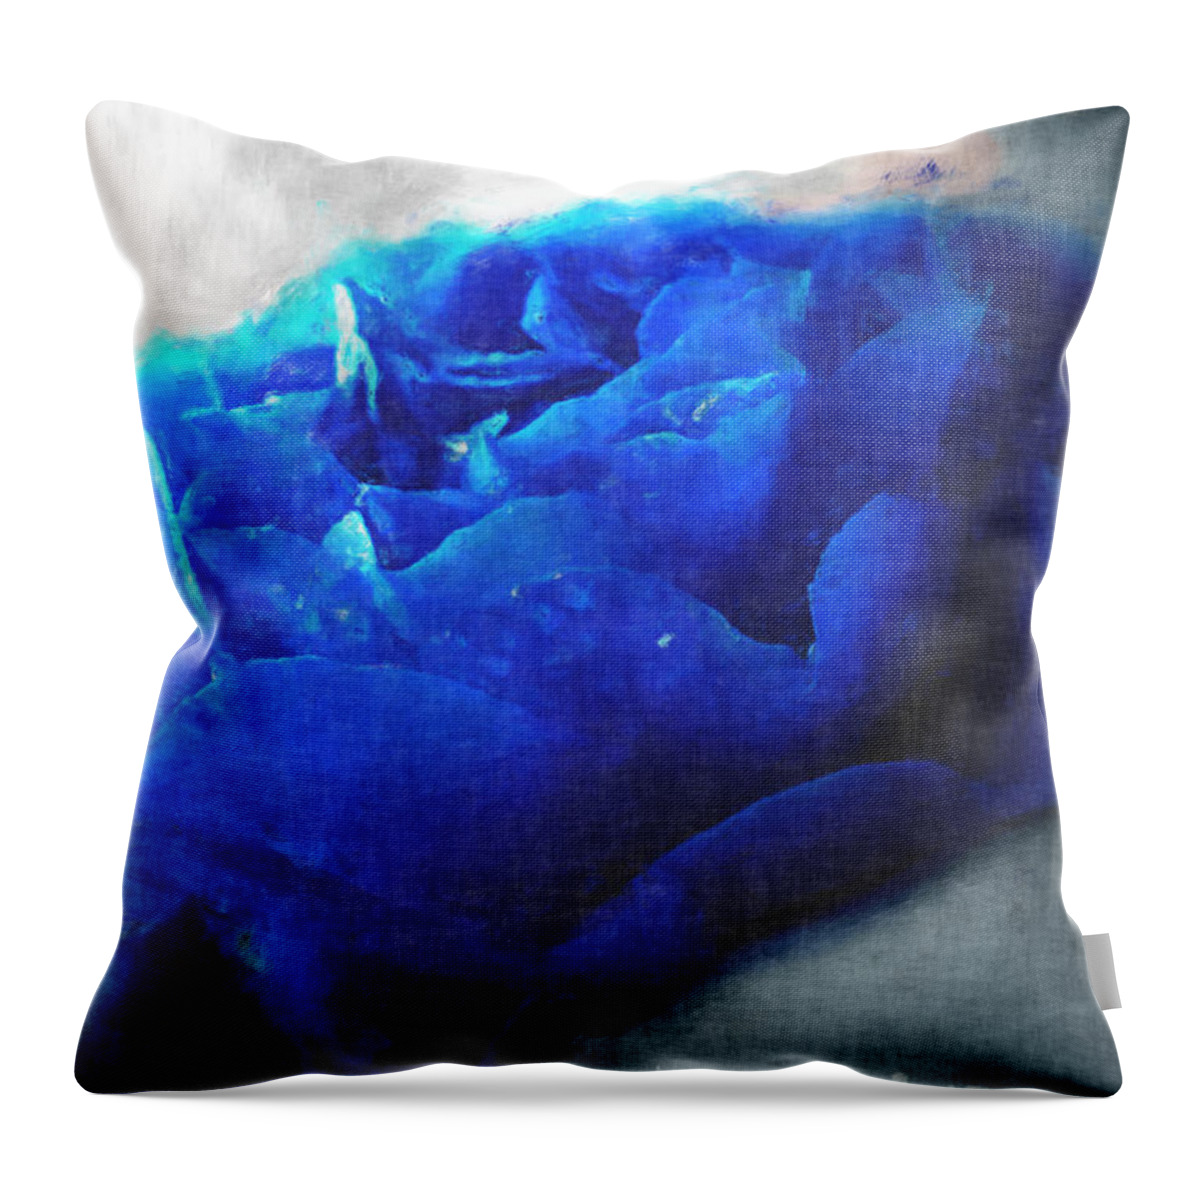  Throw Pillow featuring the digital art Blue Rose by Debbie Portwood